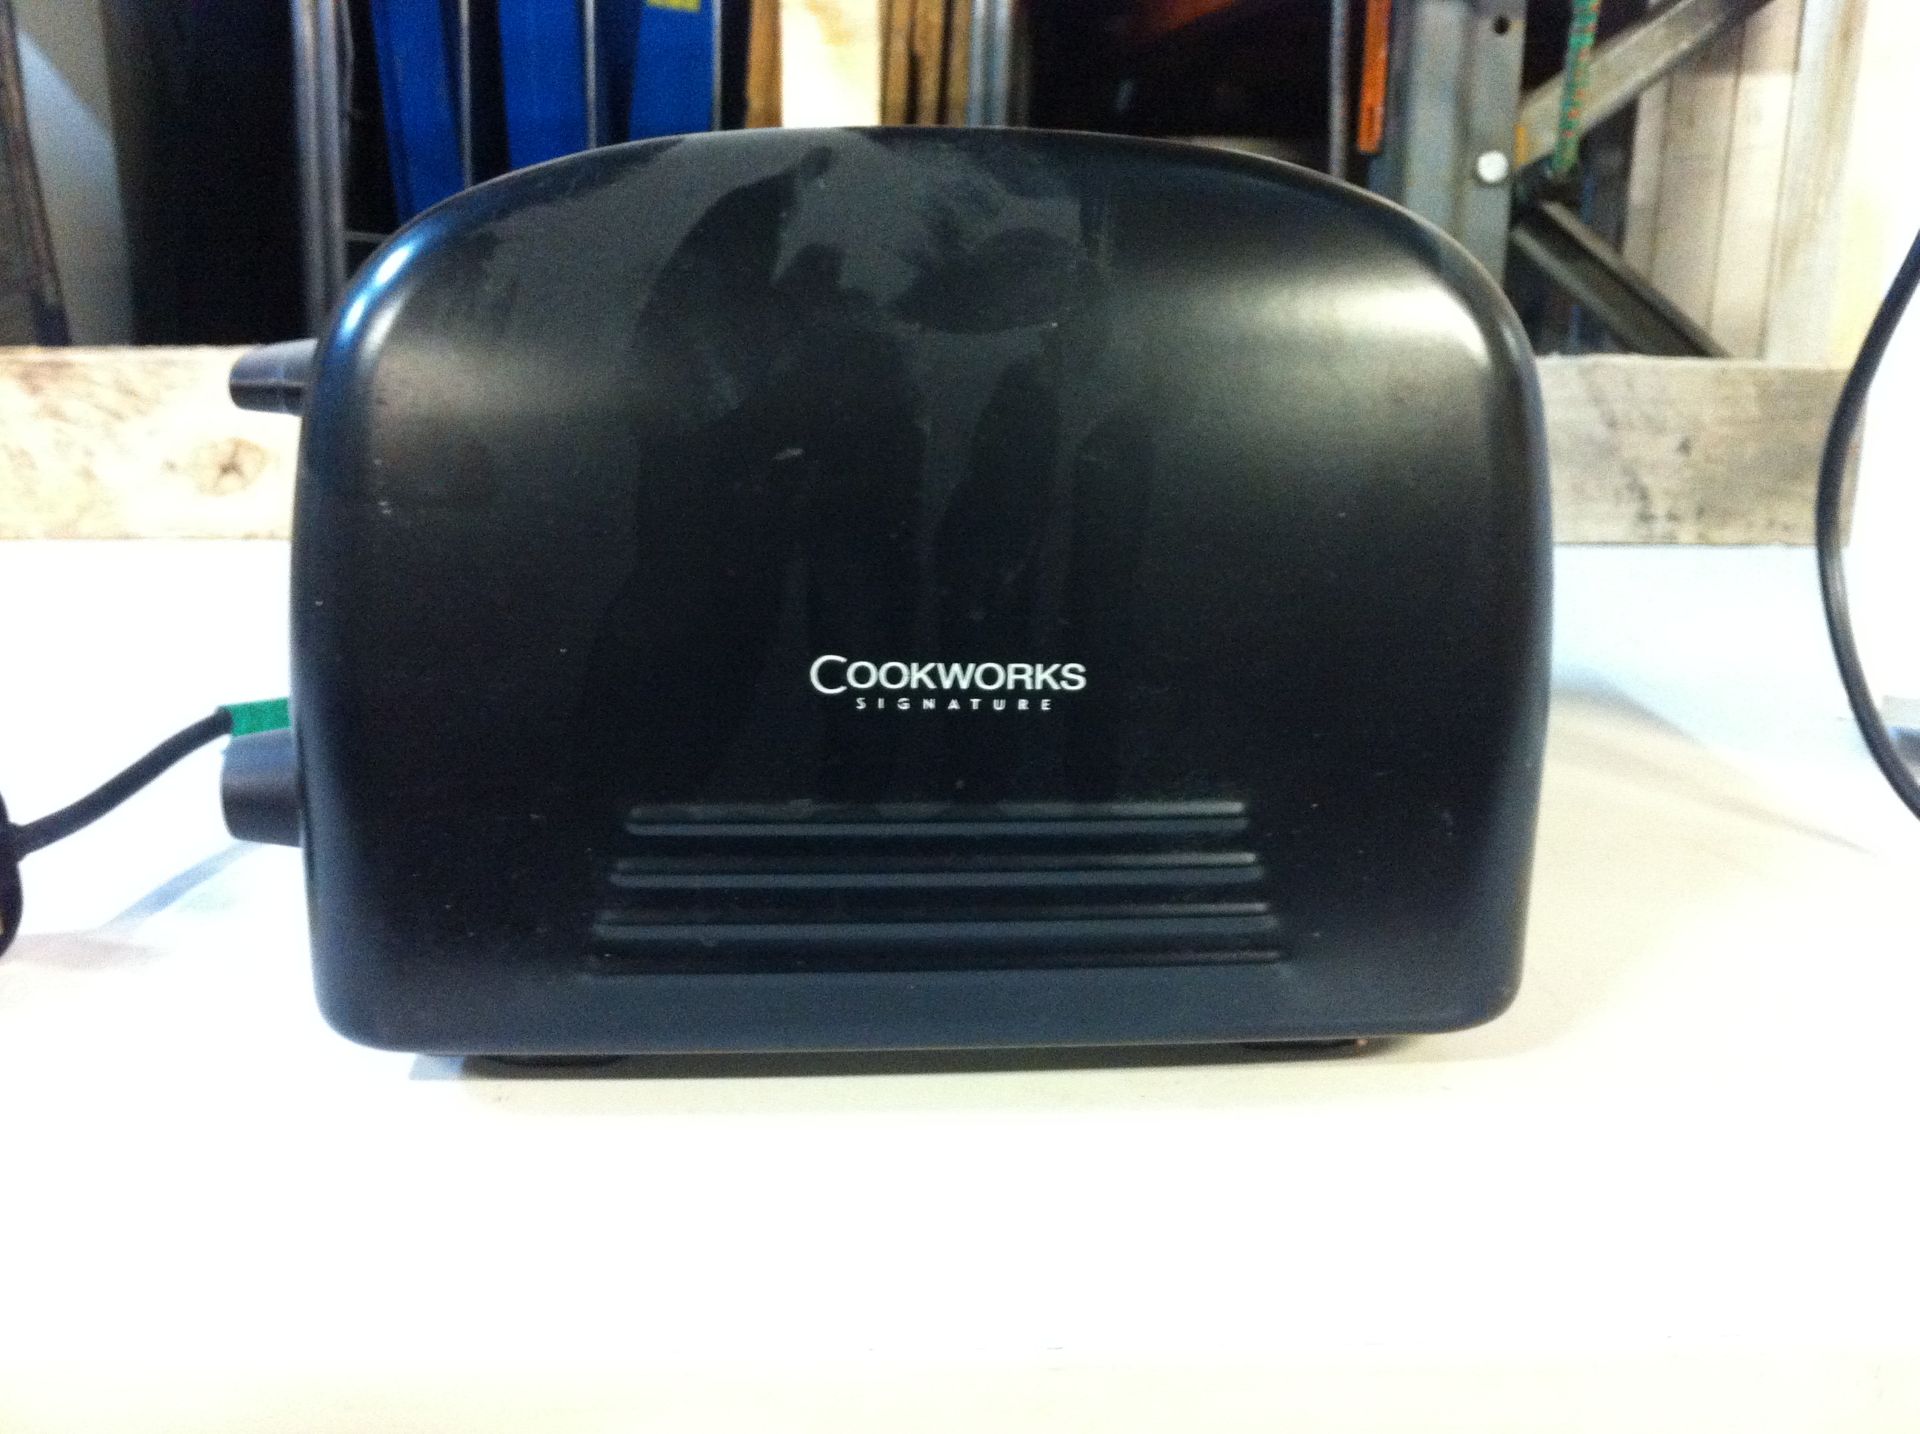 Tesco 240v Microwave Oven and Cookworks Toaster - Image 2 of 4